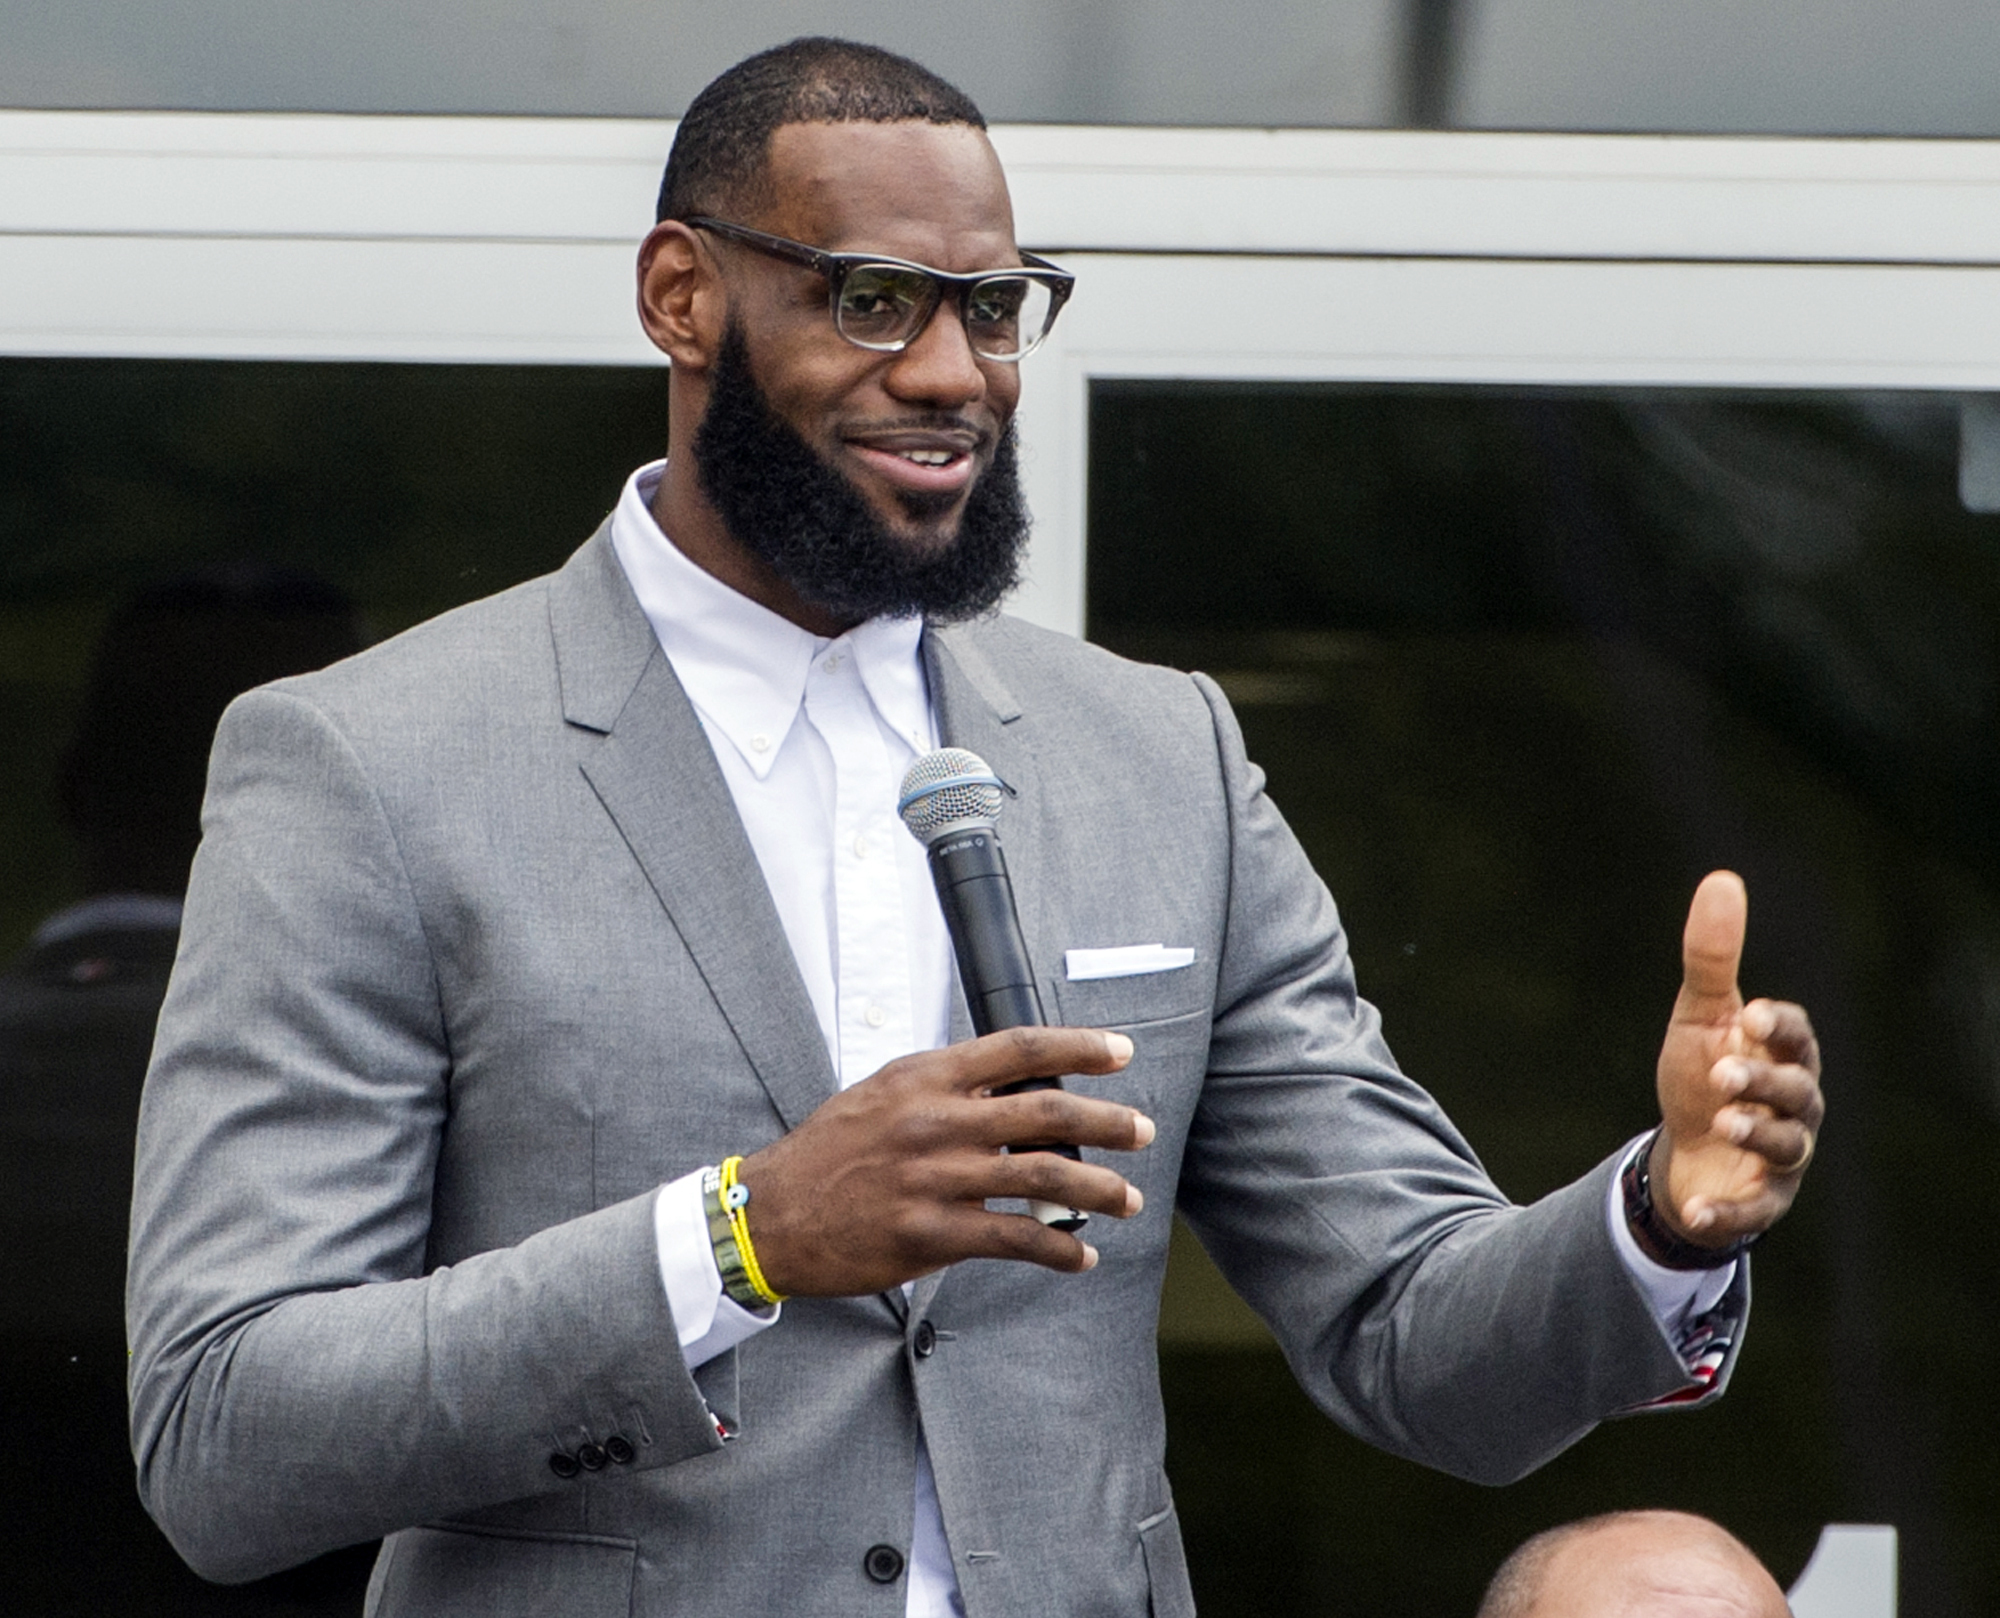 With Fenway Sports Group's purchase of the Penguins, LeBron James'  portfolio keeps growing 📈